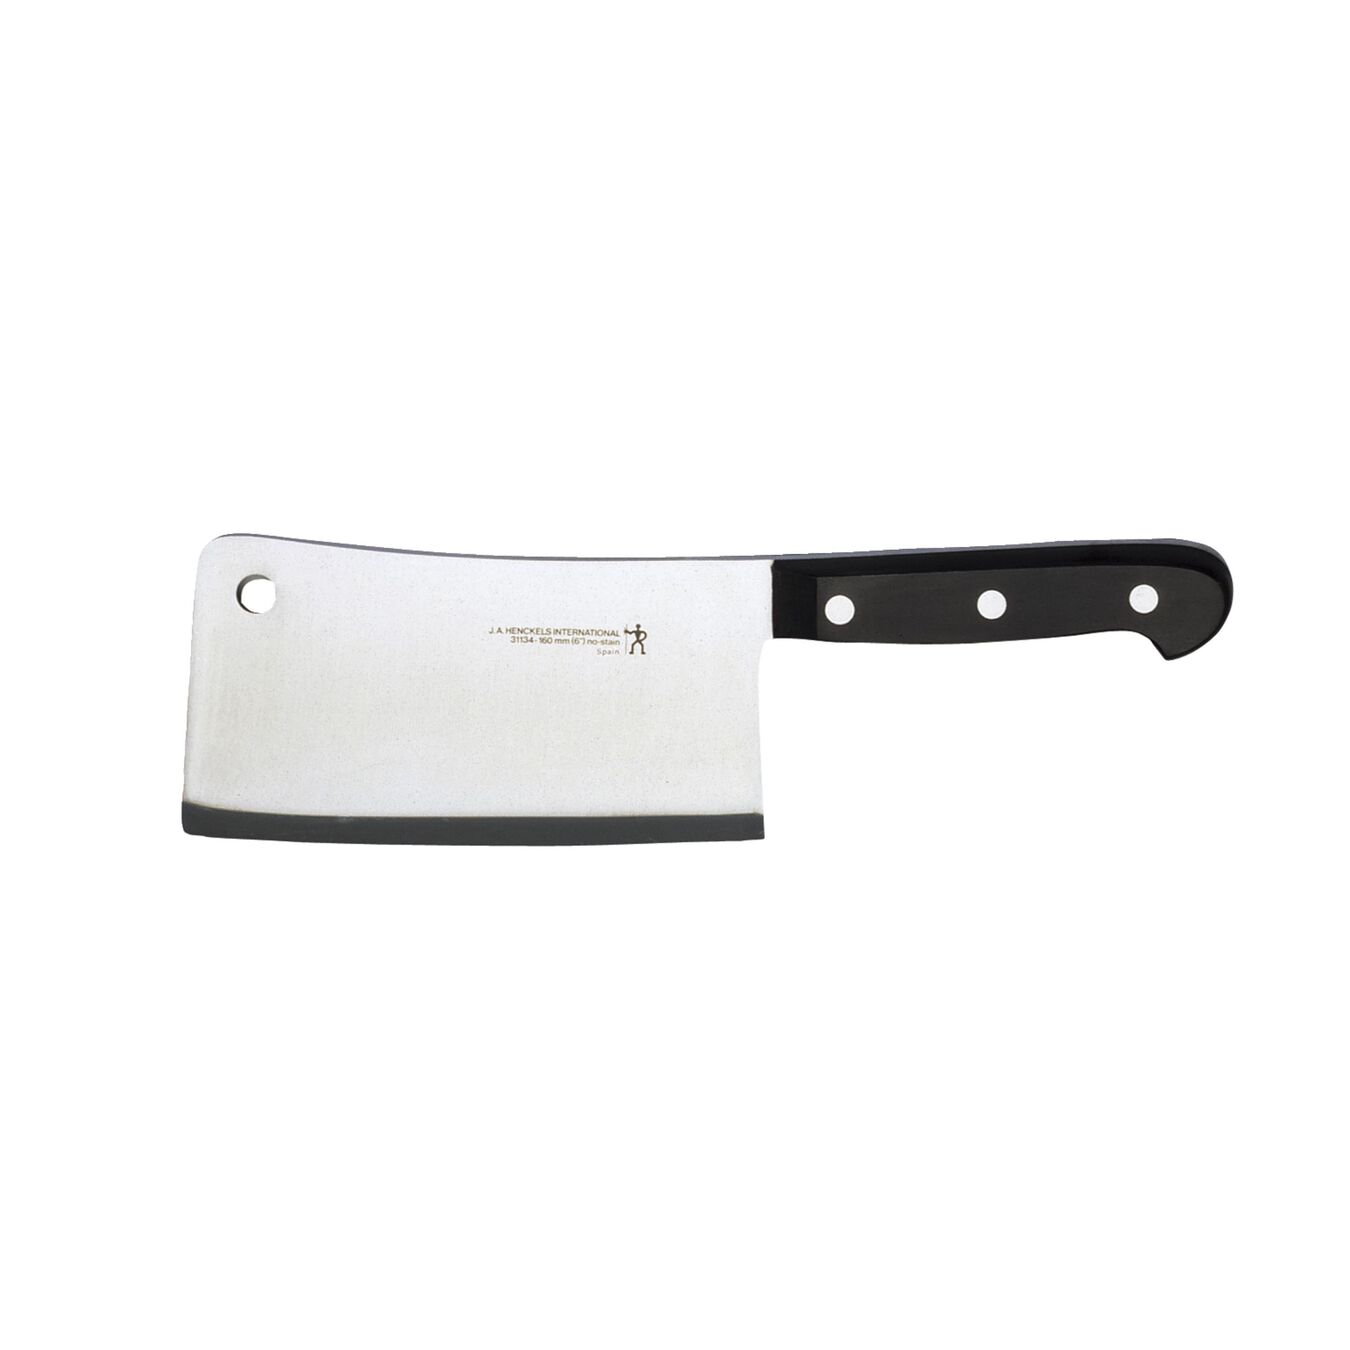 6.5 inch Cleaver - Visual Imperfections,,large 1